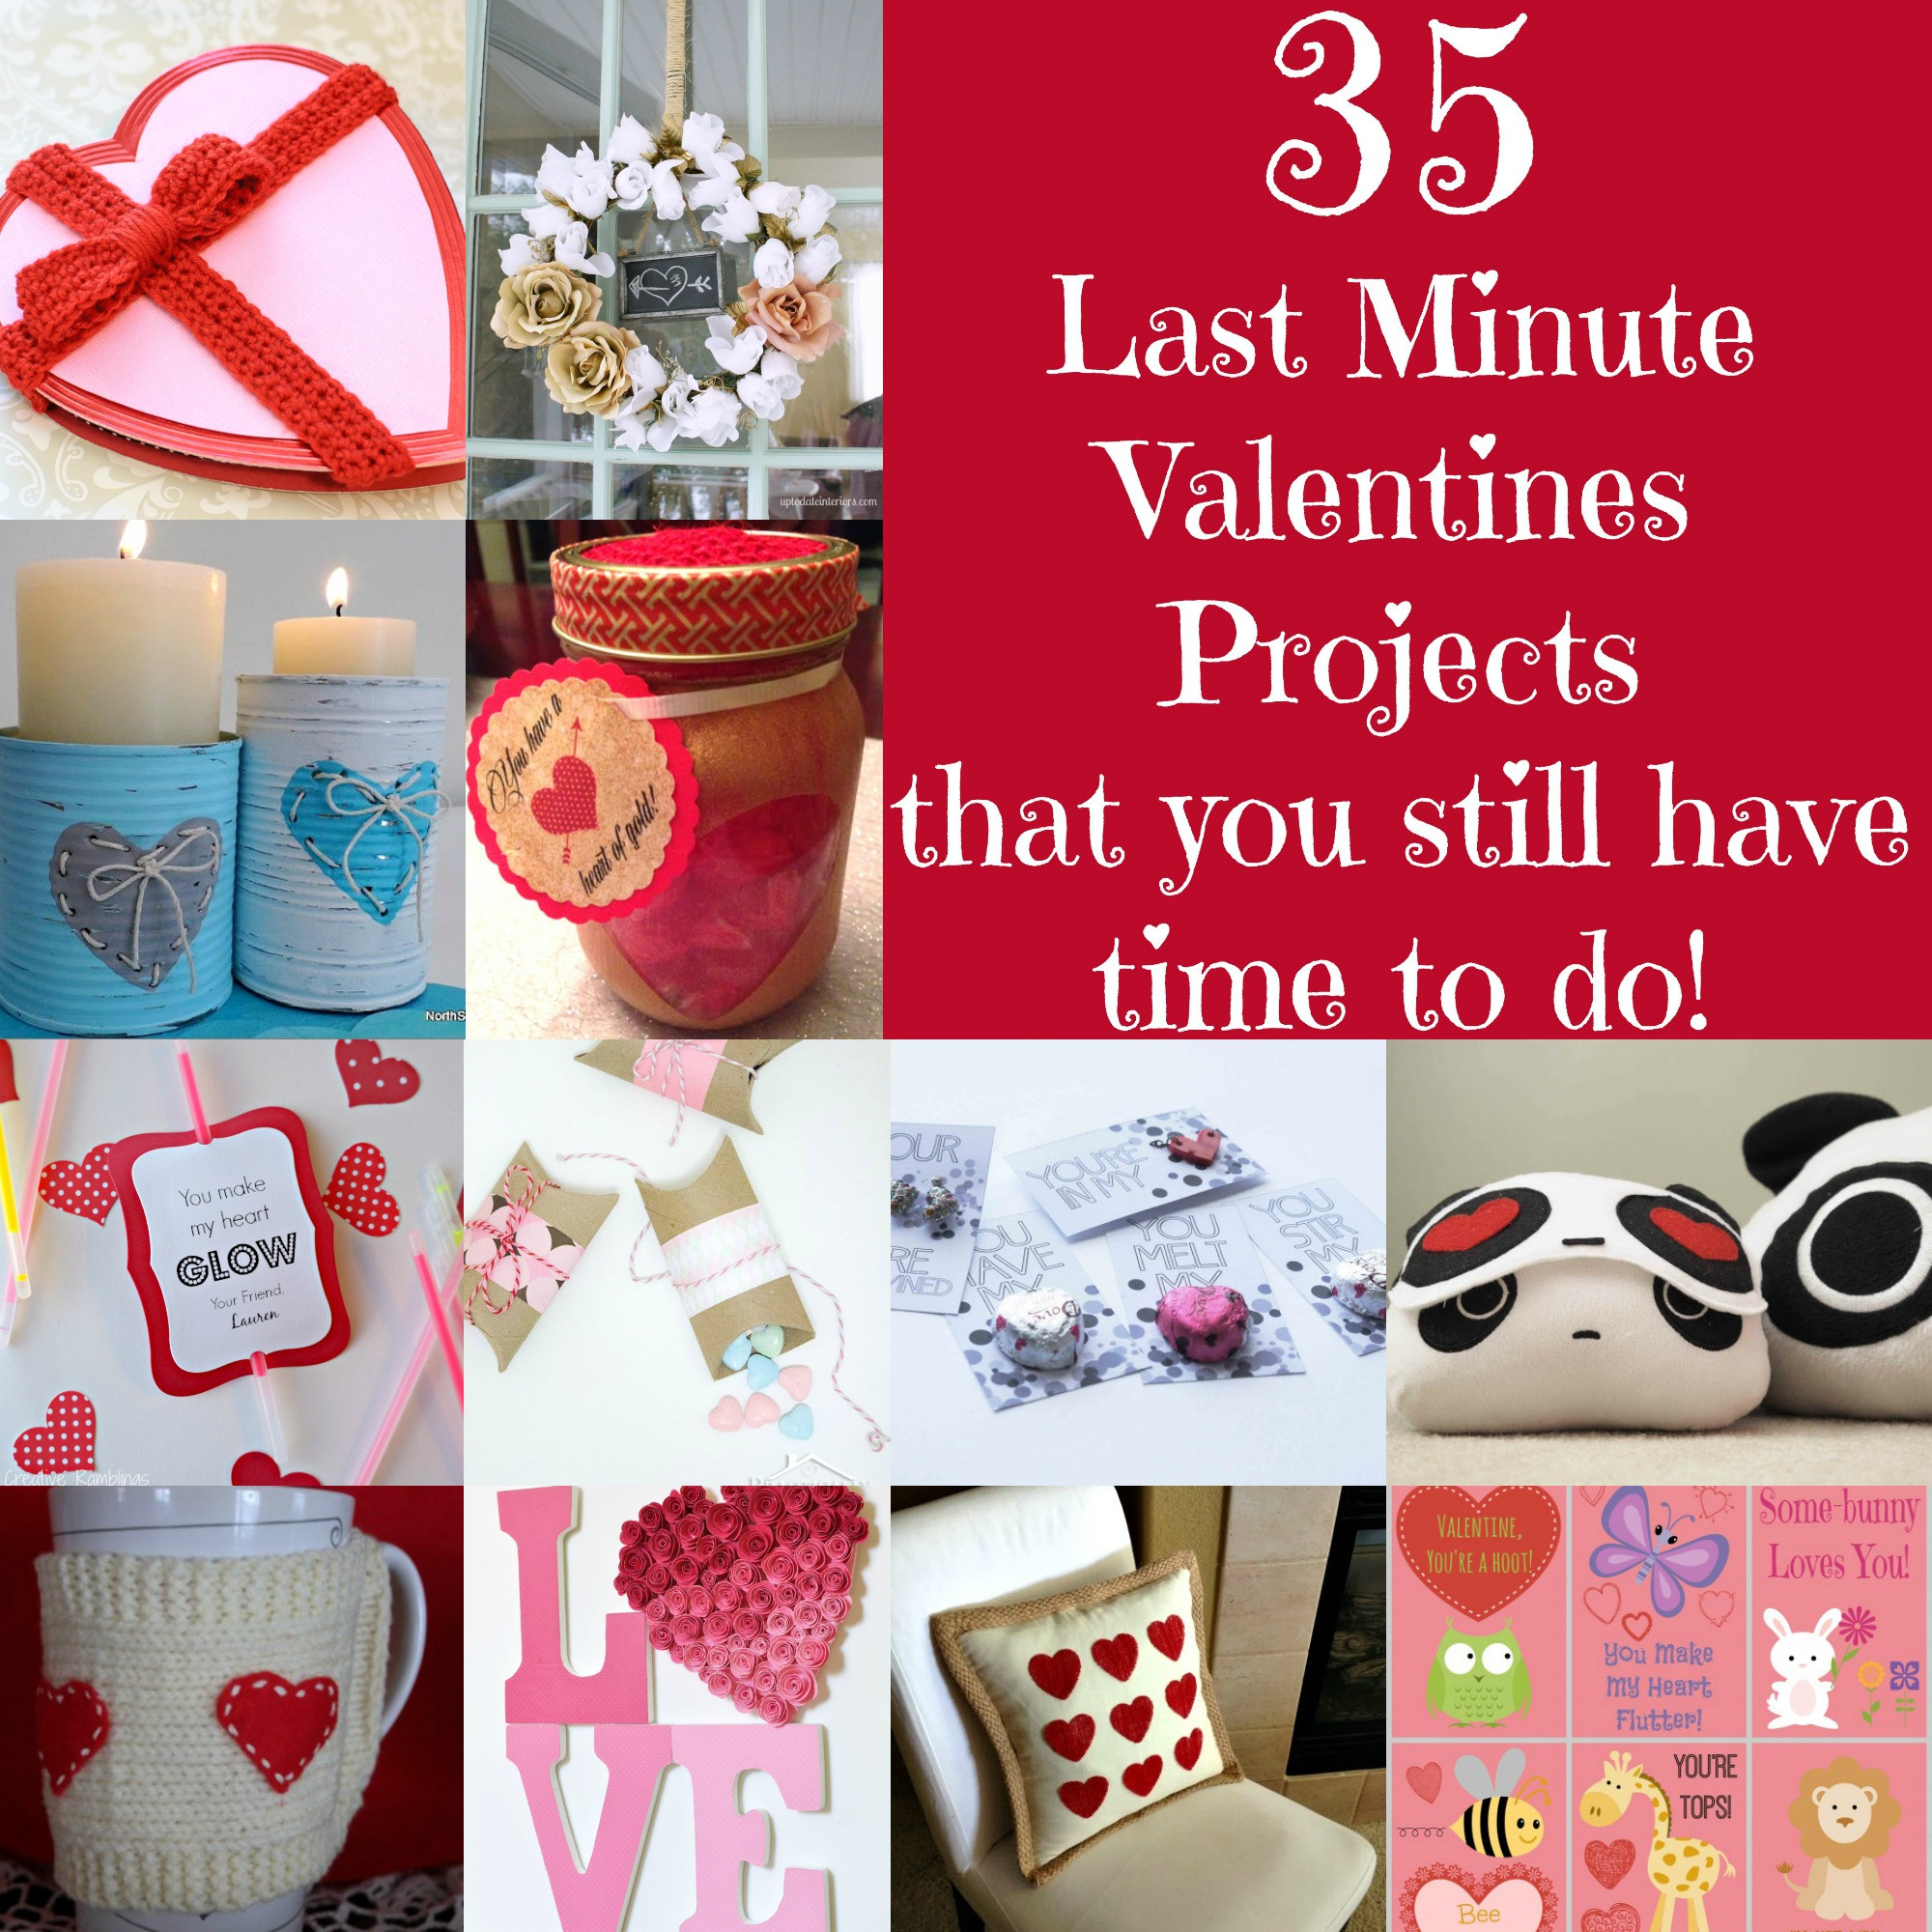 Last Minute Valentines Gift Ideas
 35 Last Minute Valentines Projects Craft Dictator